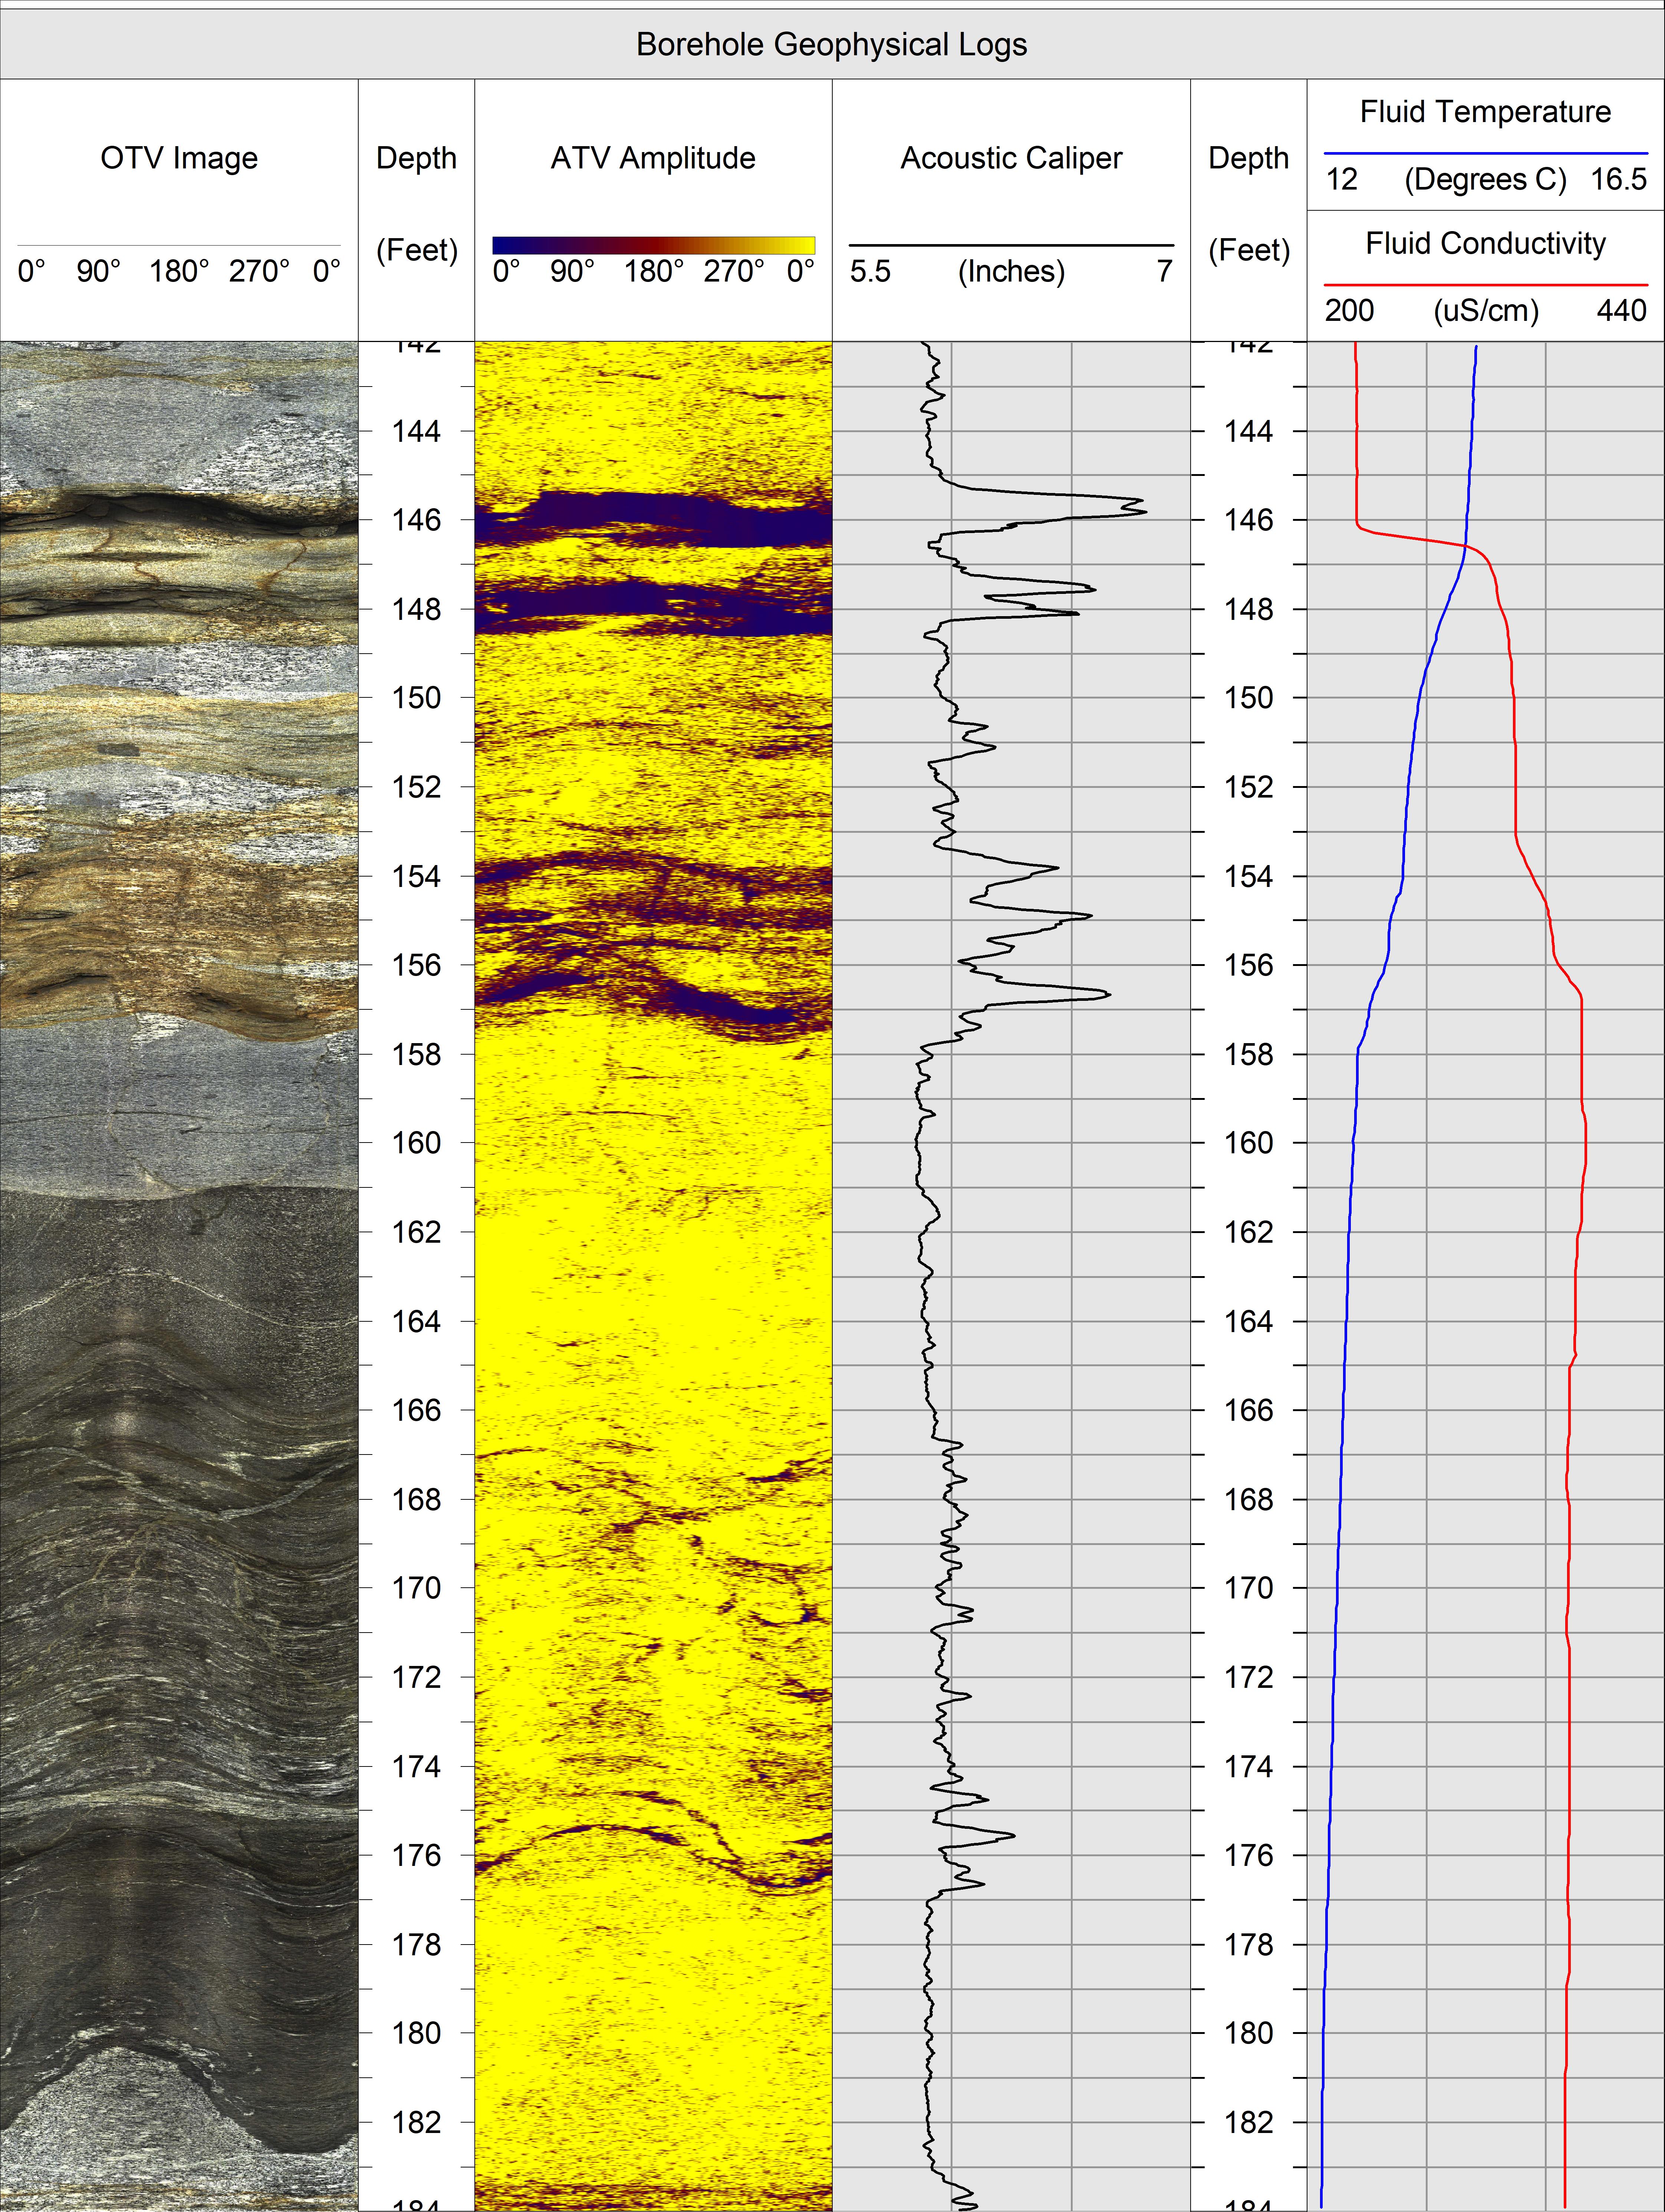 Optical Televiewer (OTV), acoustic televiewer (ATV), caliper, fluid temperature, and fluid conductivity logs from an open bedrock borehole in North Carolina.